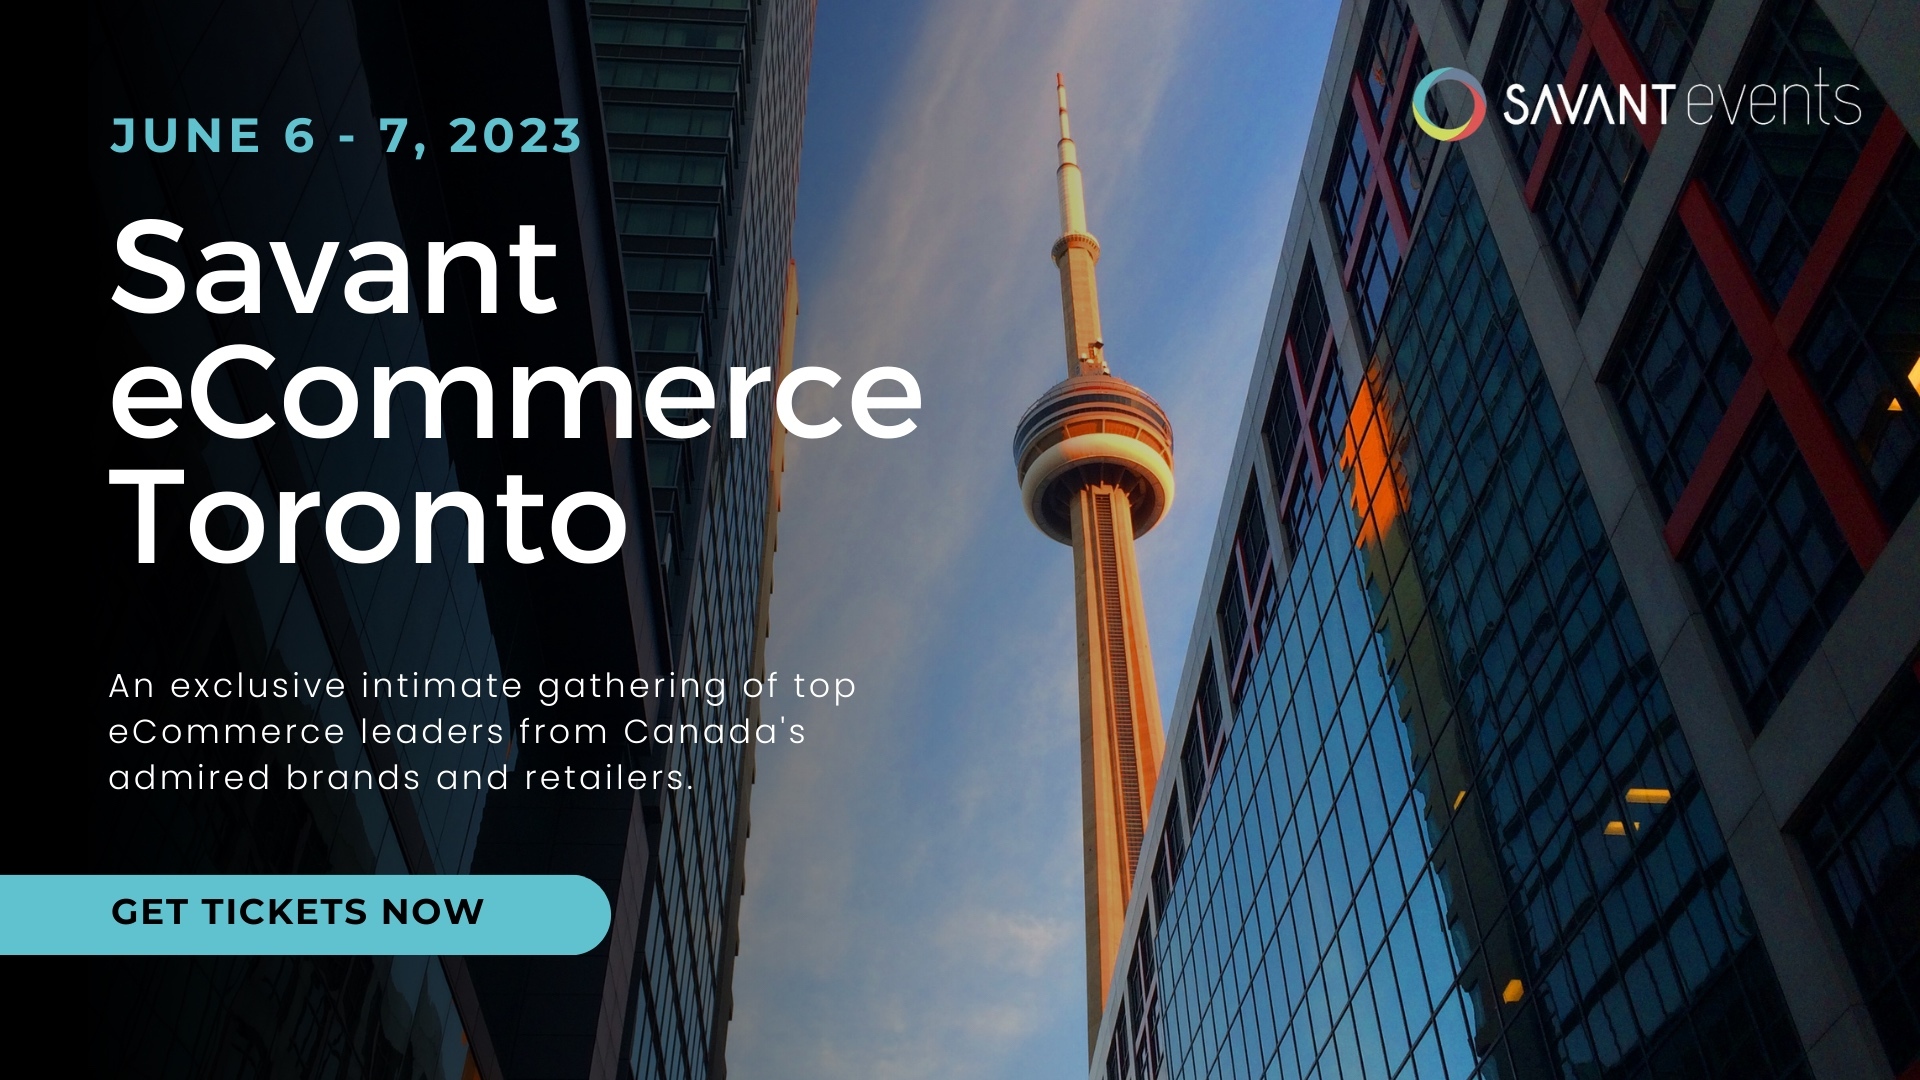 Savant eCommerce Toronto 2023 - sustainable growth strategies to engage customers and inspire loyalty